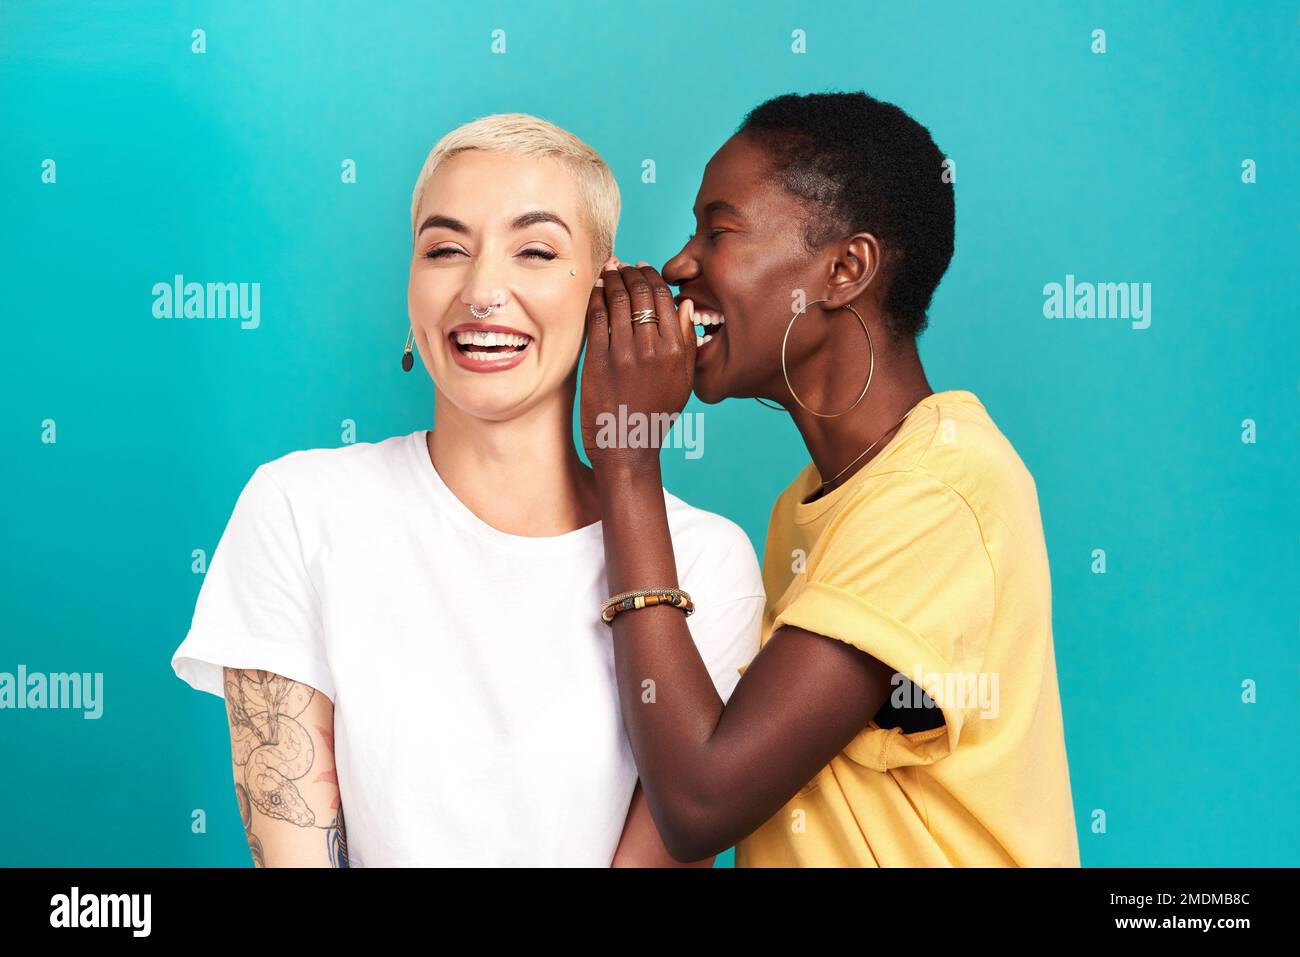 Youre not gonna believe this but.Studio shot of a young woman whispering in her friends ear against a turquoise background. Stock Photo